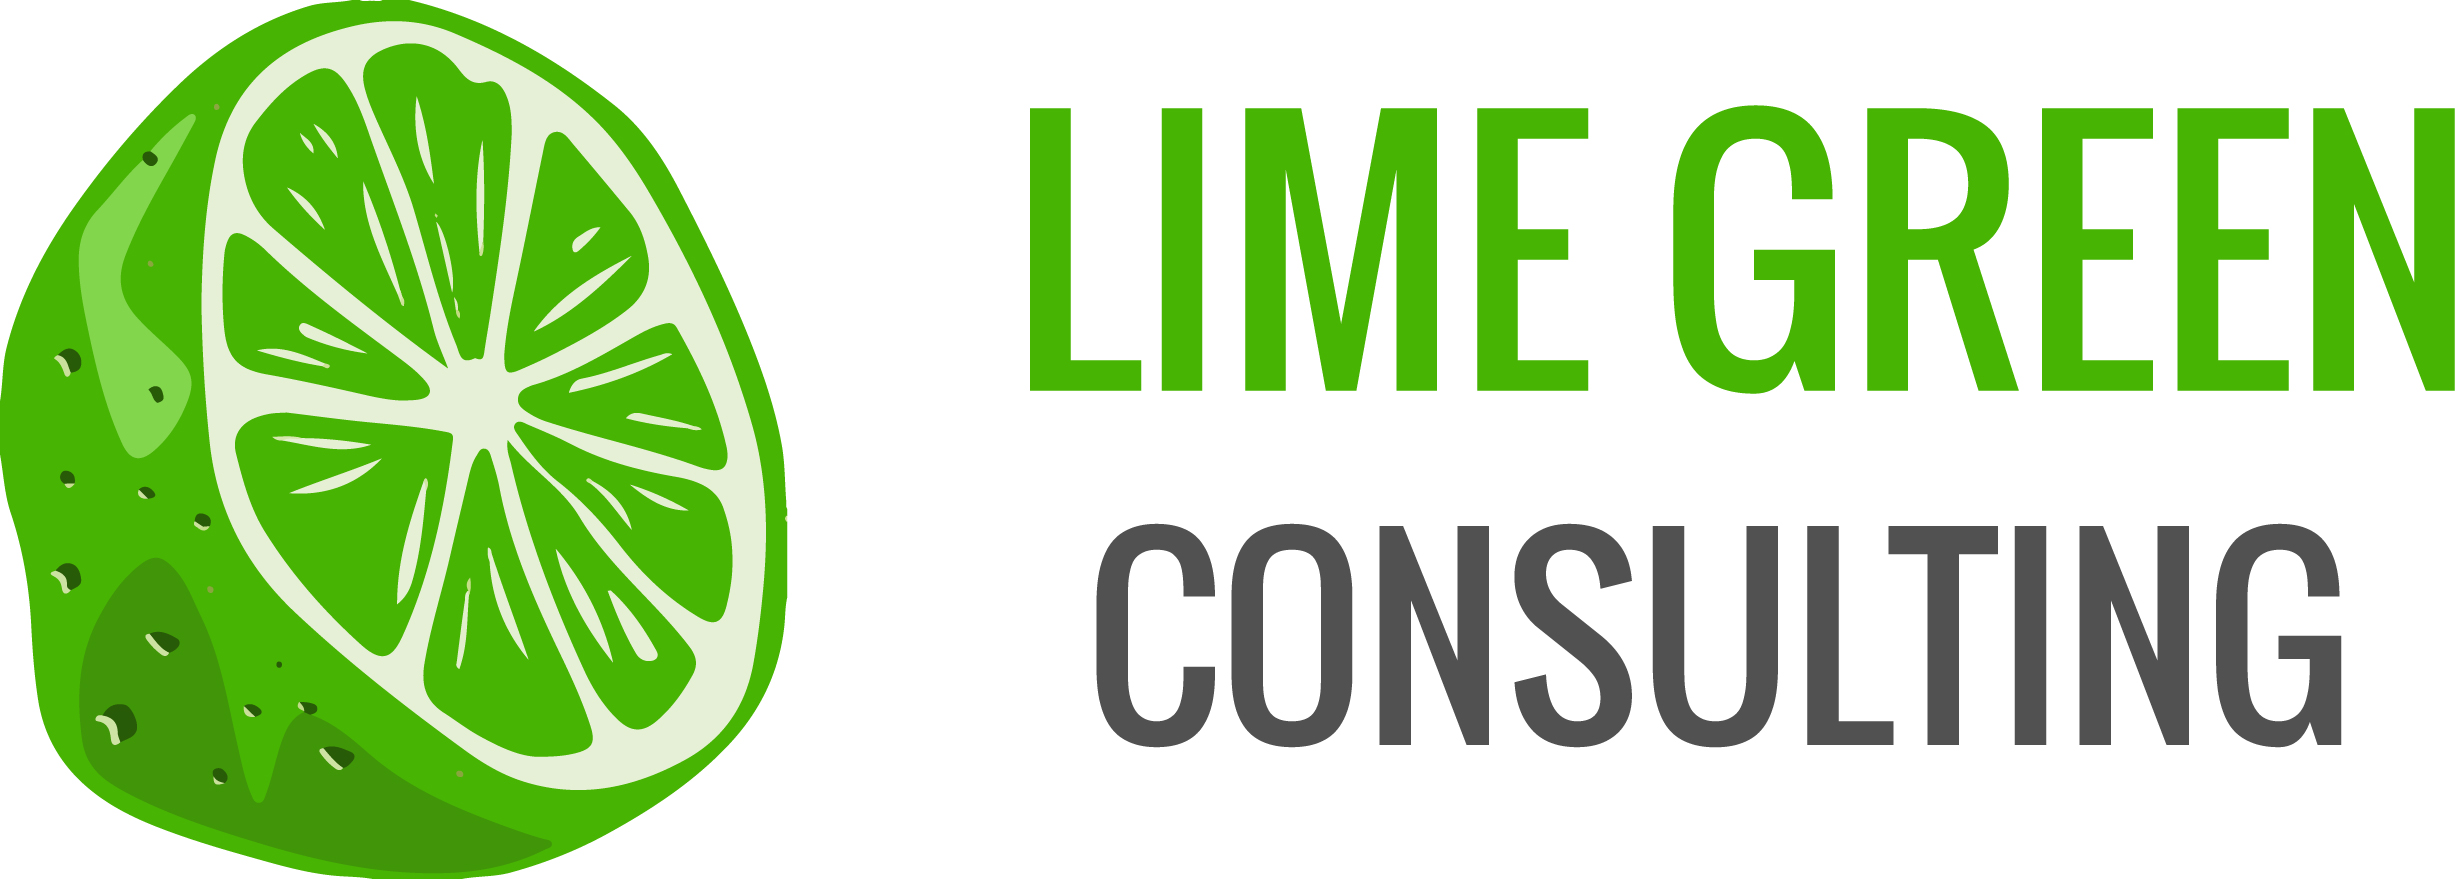 Lime Green Consulting logo